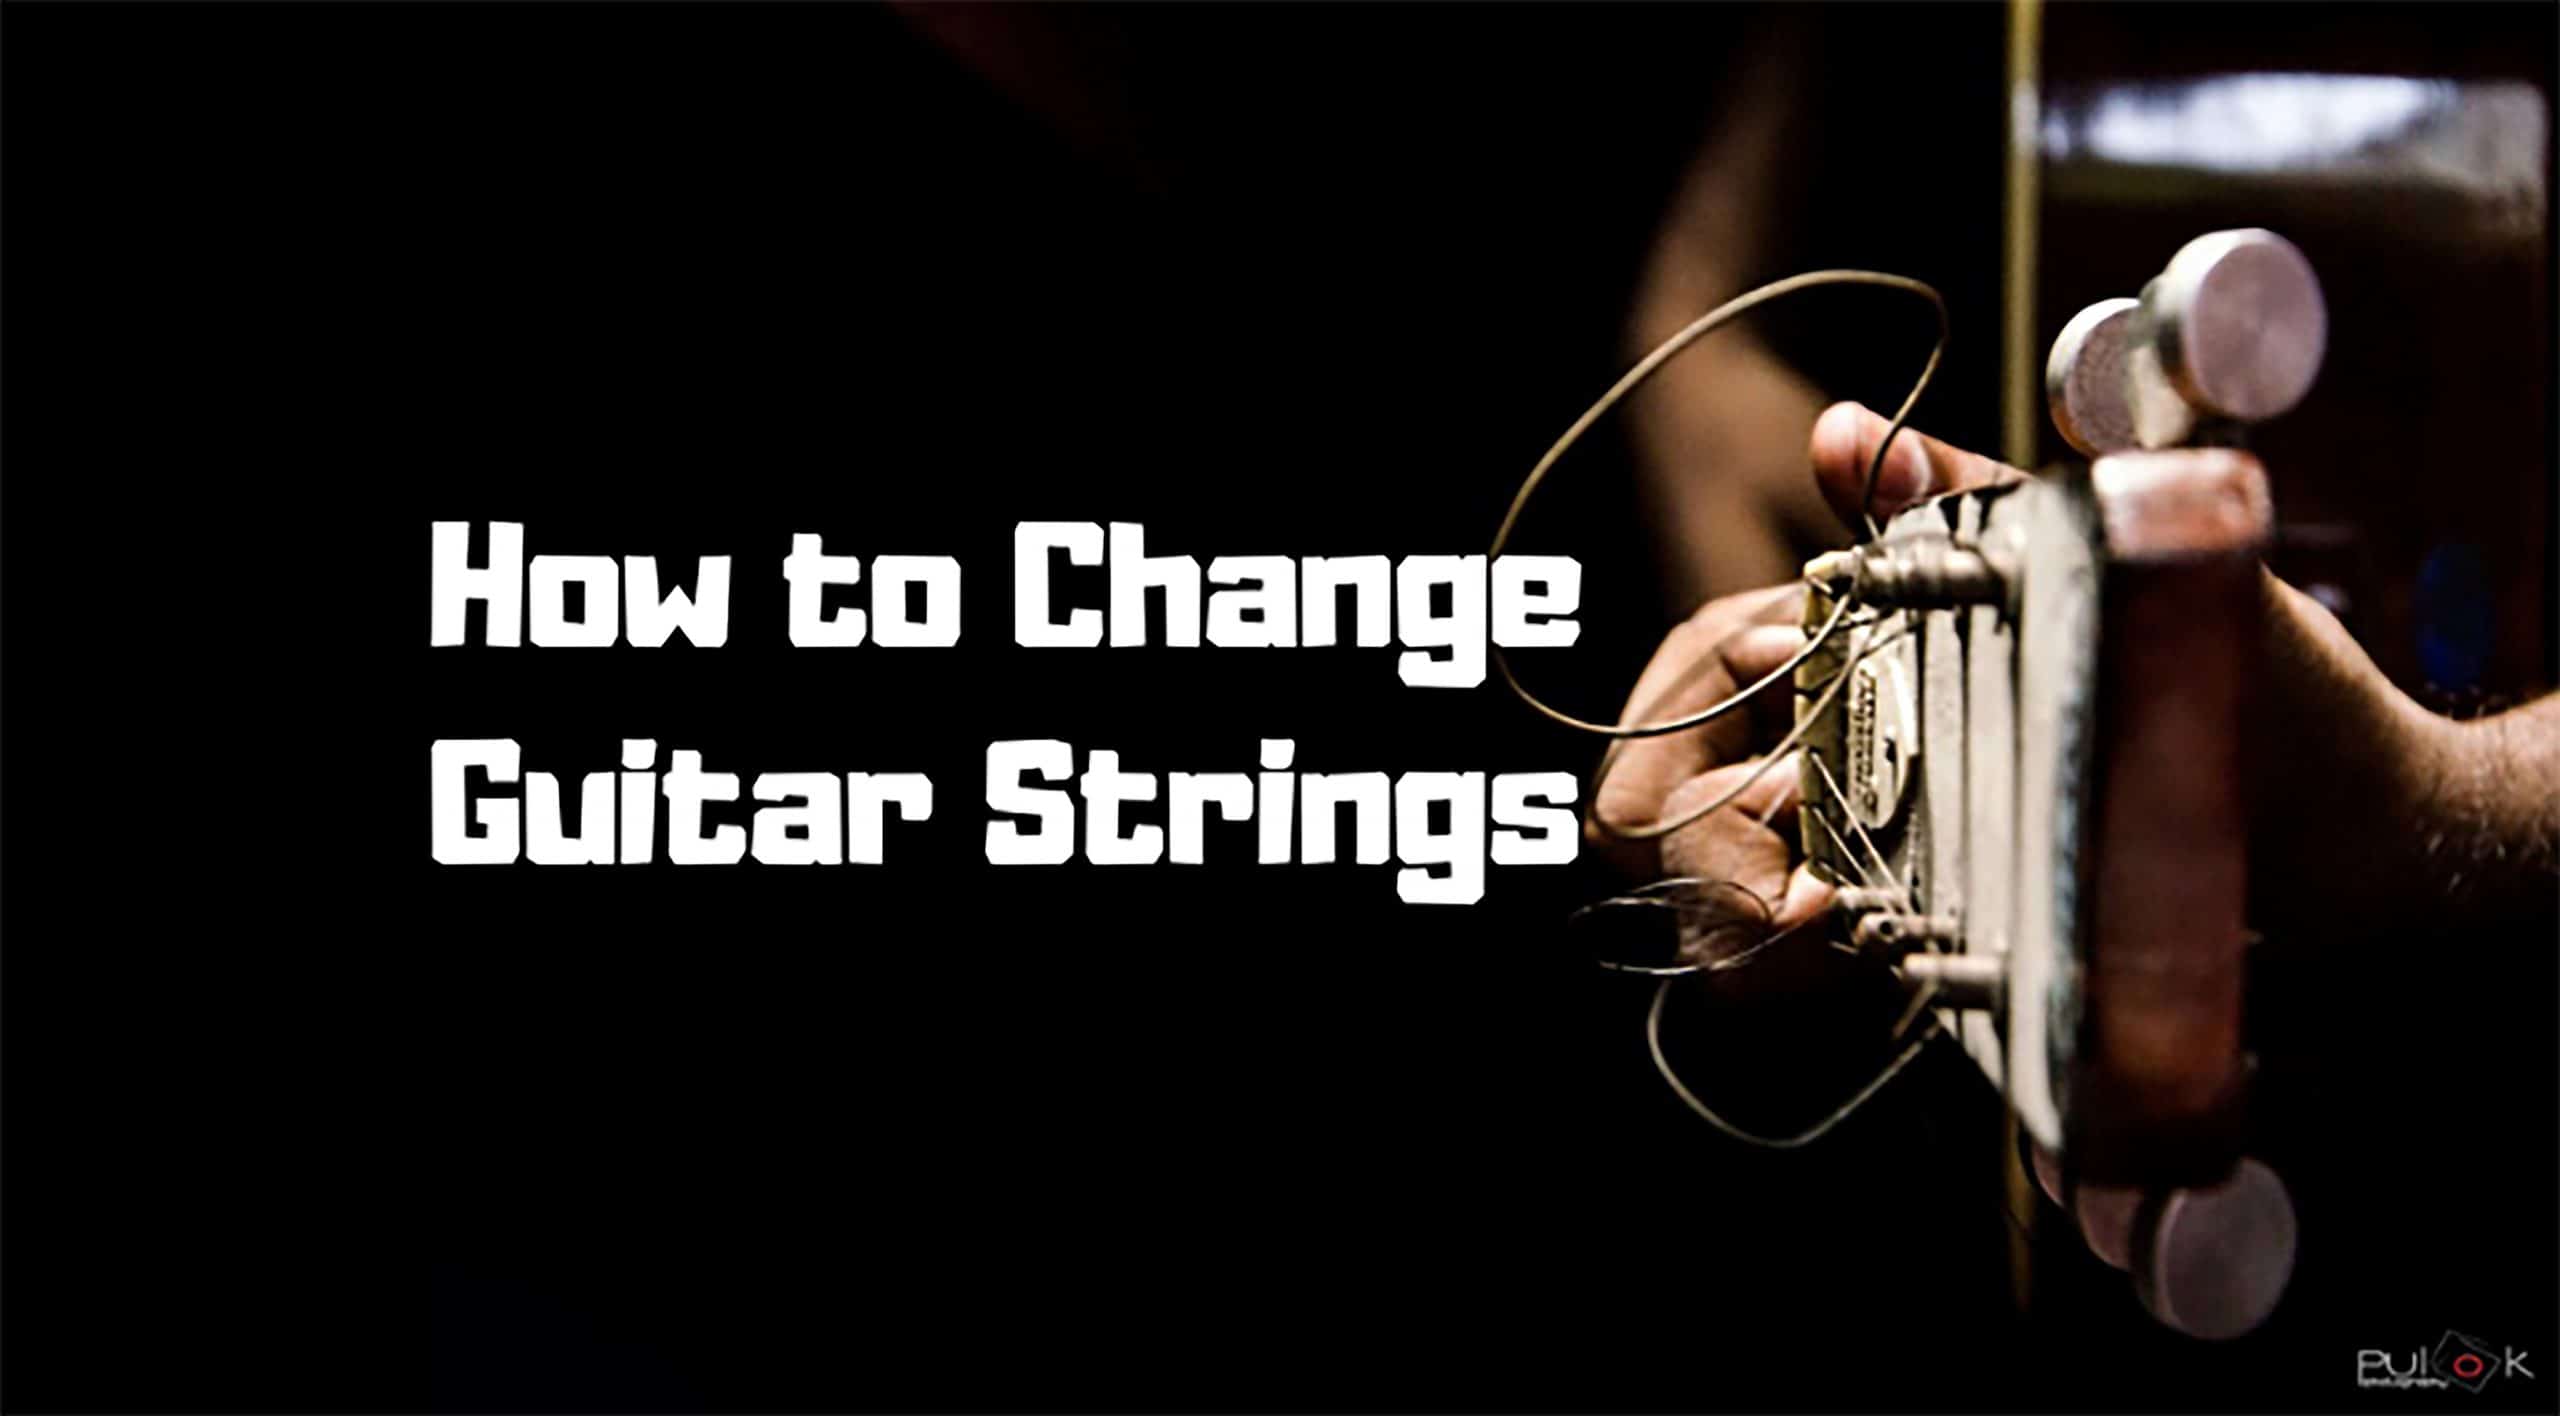 how to change guitar strings step by step